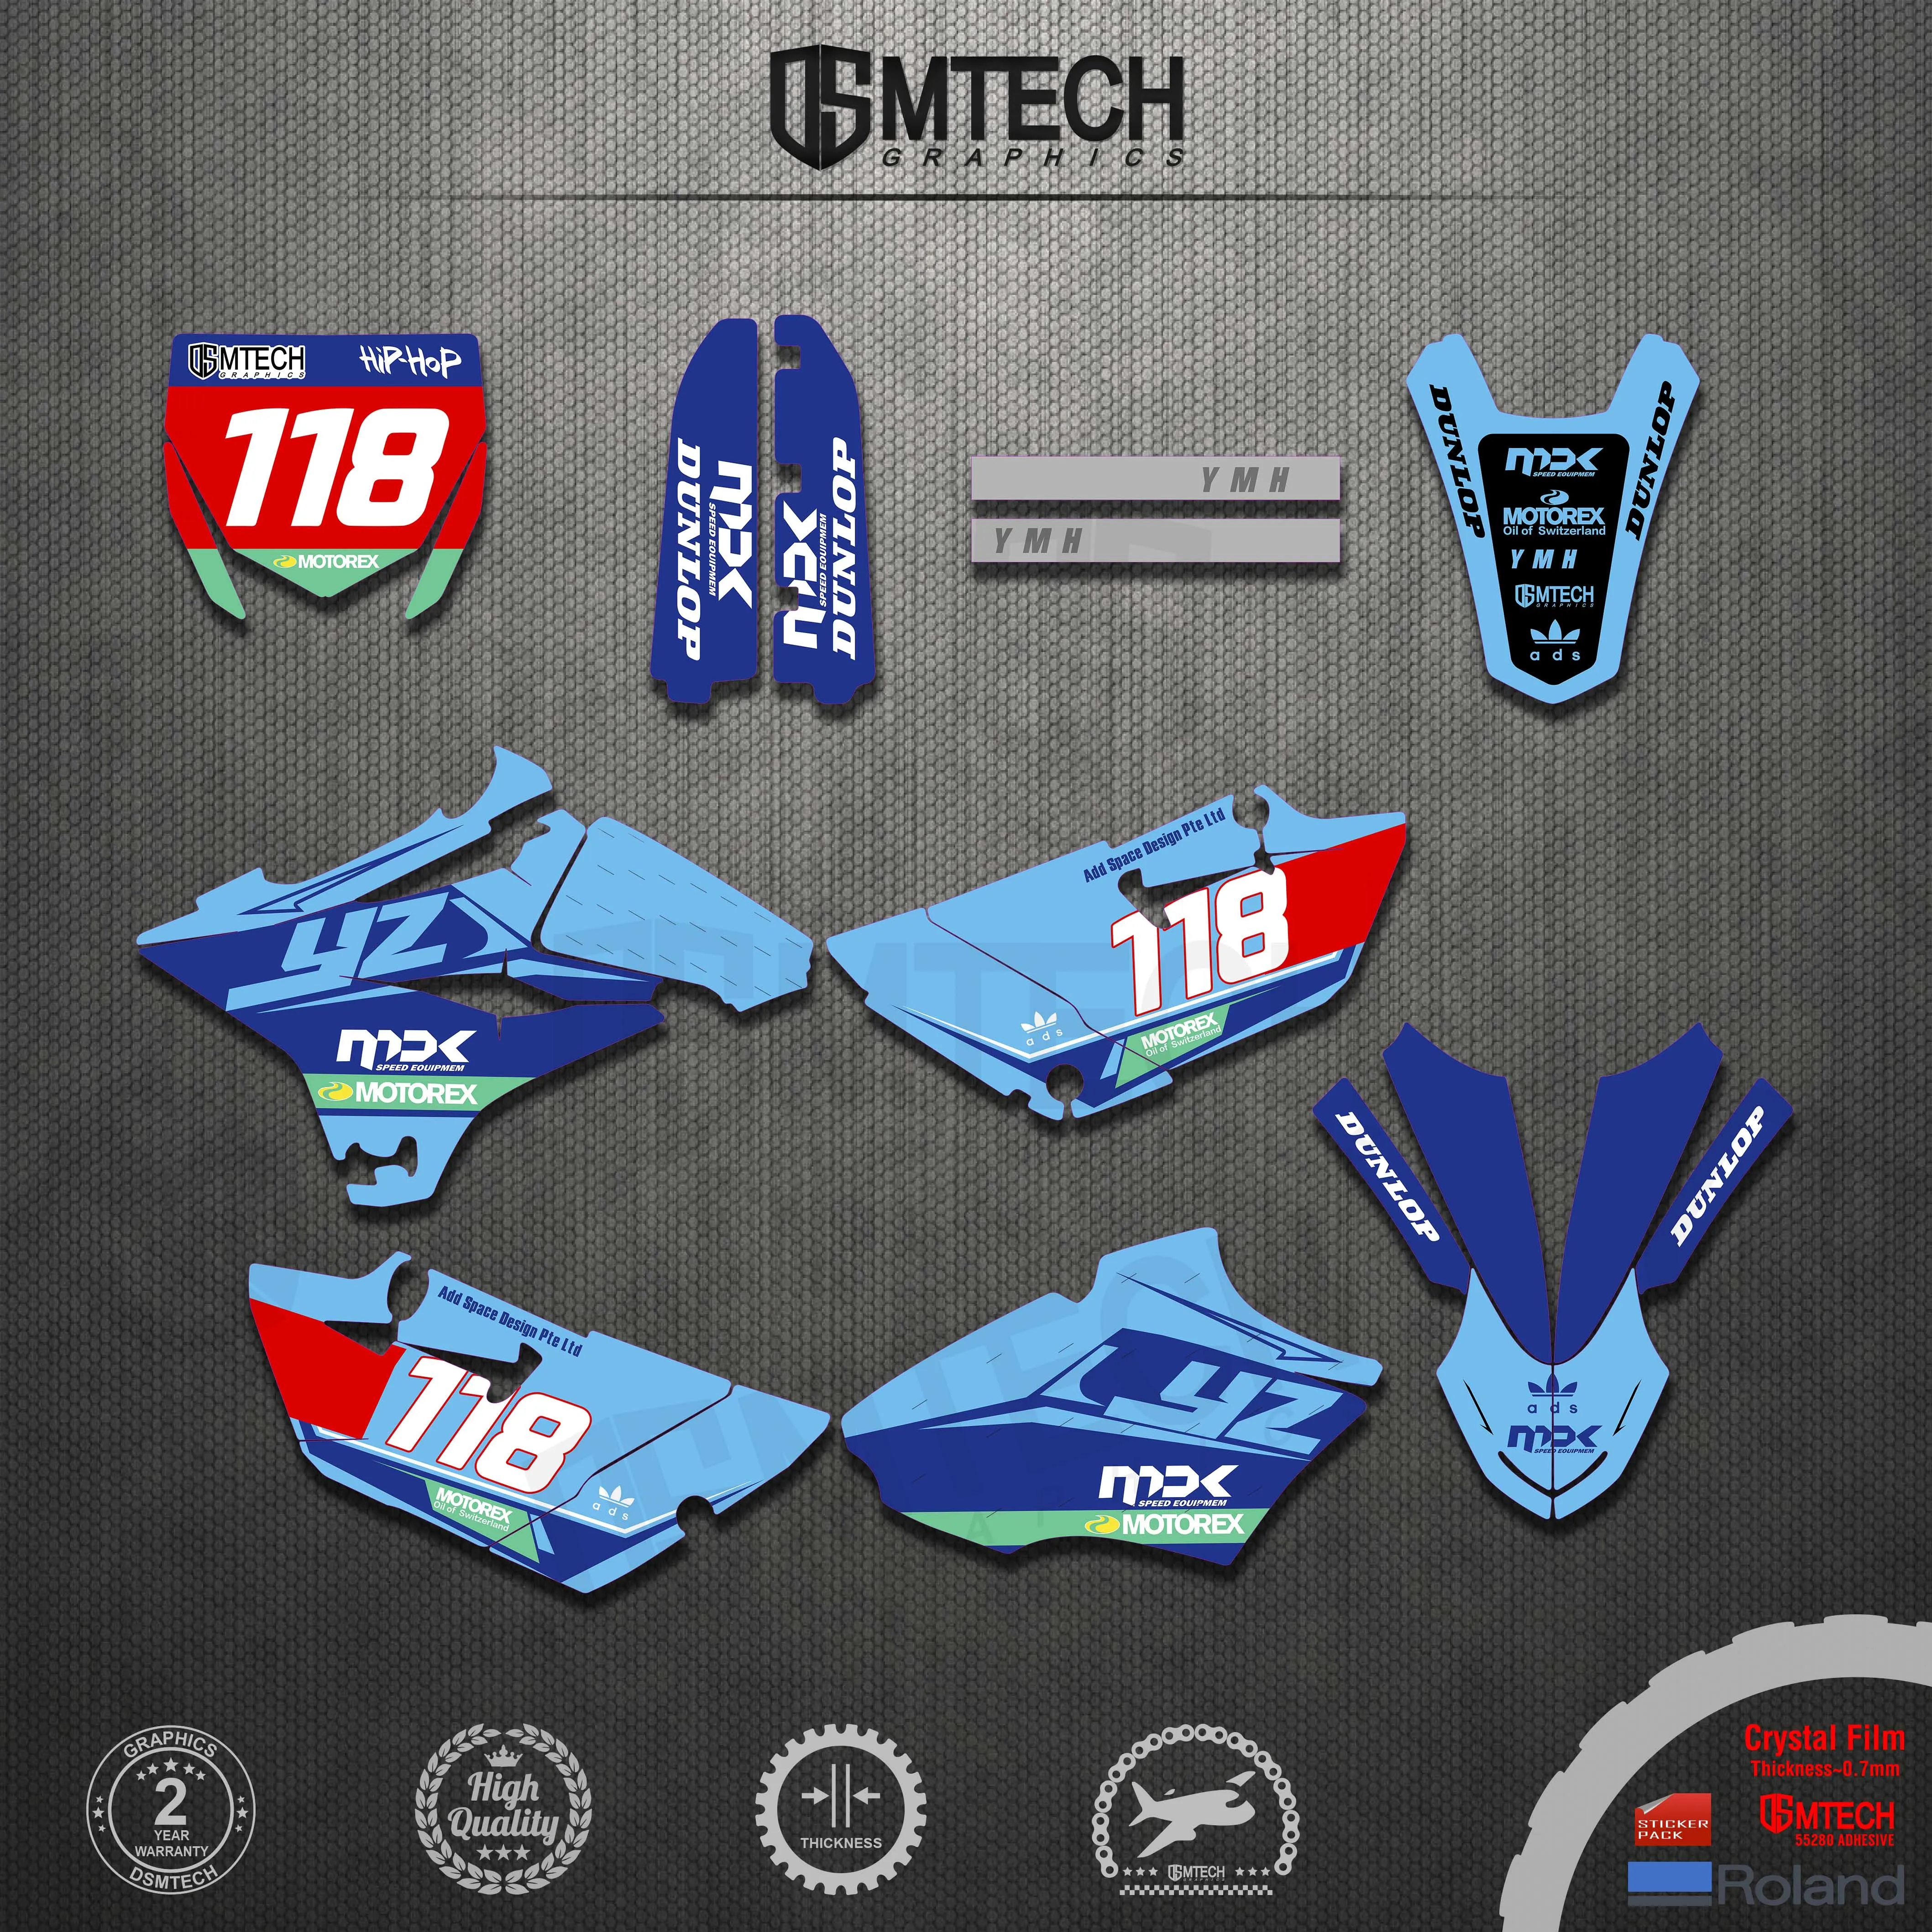 DSMTECH Motorcycle  Decals Stickers Graphics Kits For YAMAHA YZ85 YZ 85 2015 2016 2017 2018 2019 2020 YZ-85